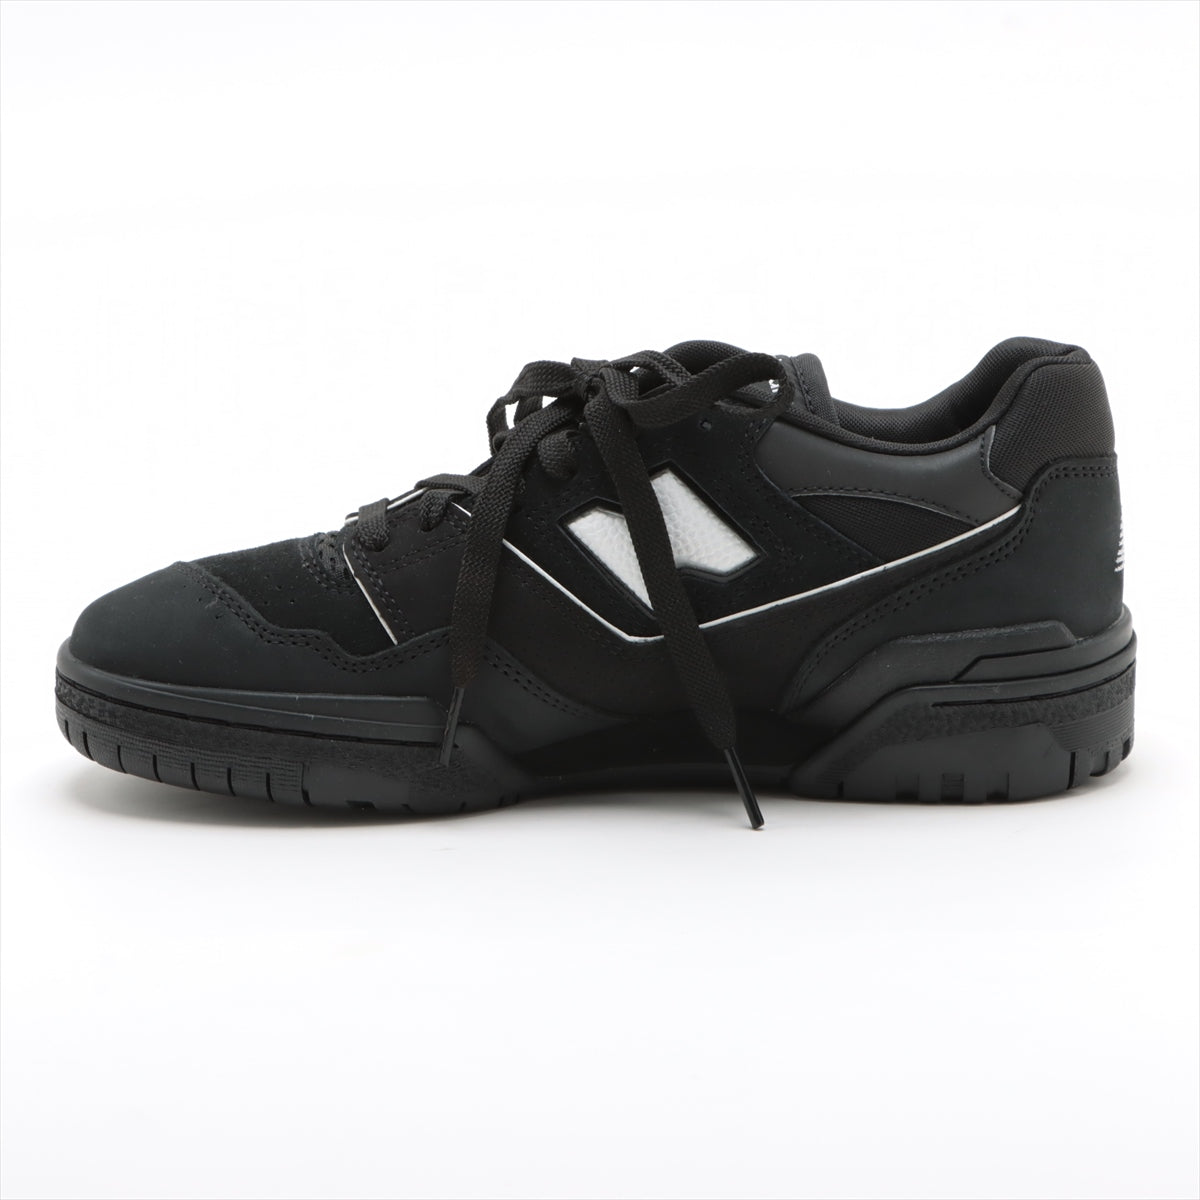 New Balance x Atmos 23AW Leather & Suede Sneakers 25cm Unisex Black BB550ATM There is a box